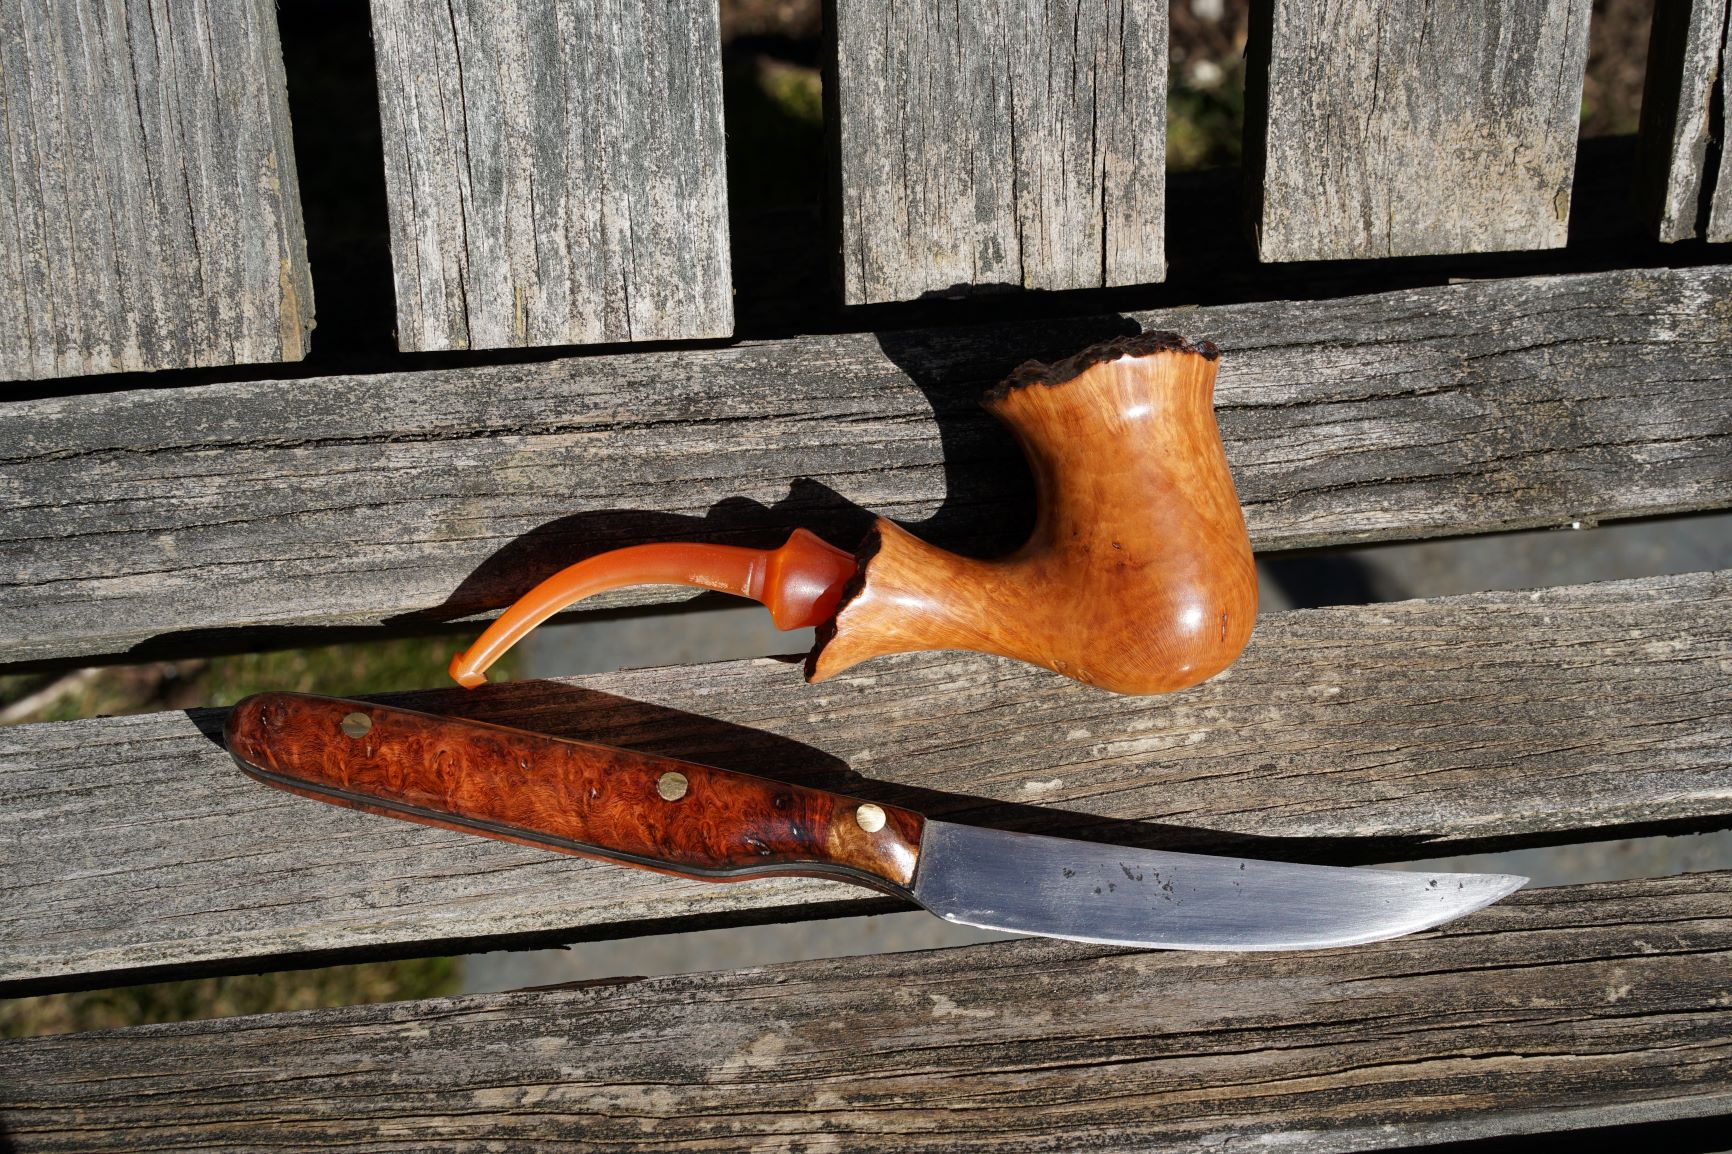 Fillet knife for fishing, with hand-forged steel, Amboyna burl & brass; and pipe turned and carved from Italian Briar wood